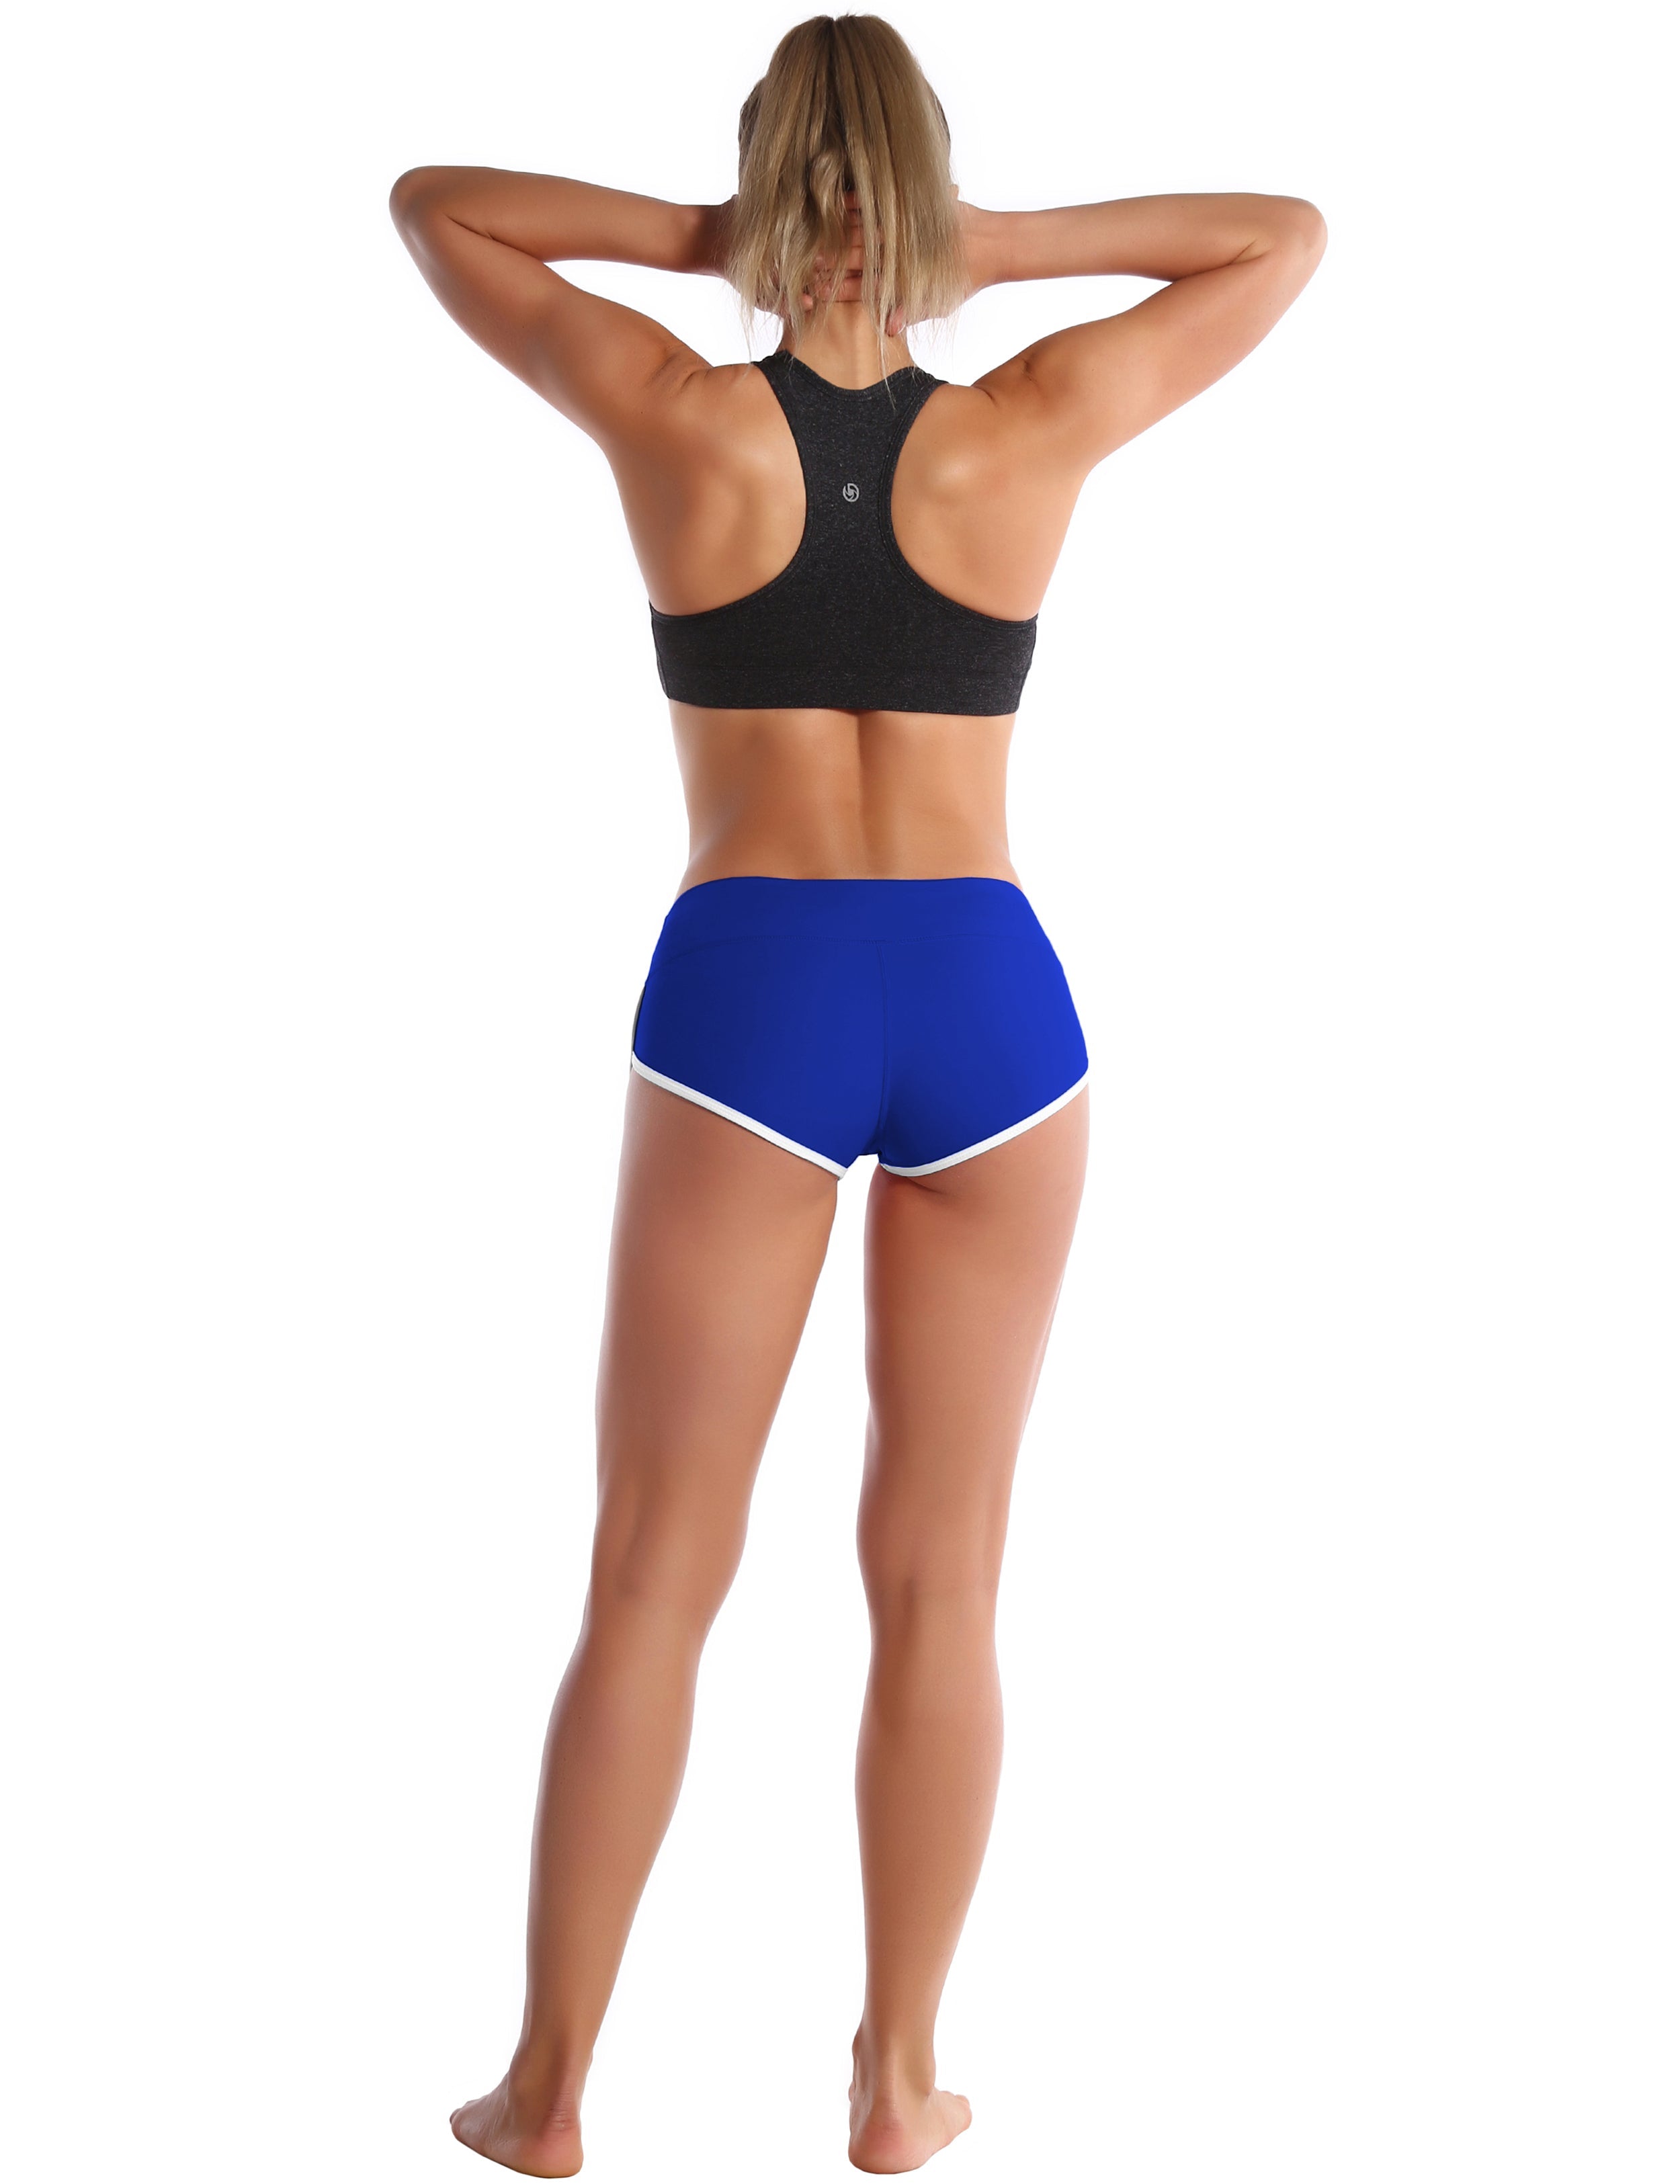 Sexy Booty Pilates Shorts navy Sleek, soft, smooth and totally comfortable: our newest sexy style is here. Softest-ever fabric High elasticity High density 4-way stretch Fabric doesn't attract lint easily No see-through Moisture-wicking Machine wash 75%Nylon/25%Spandex